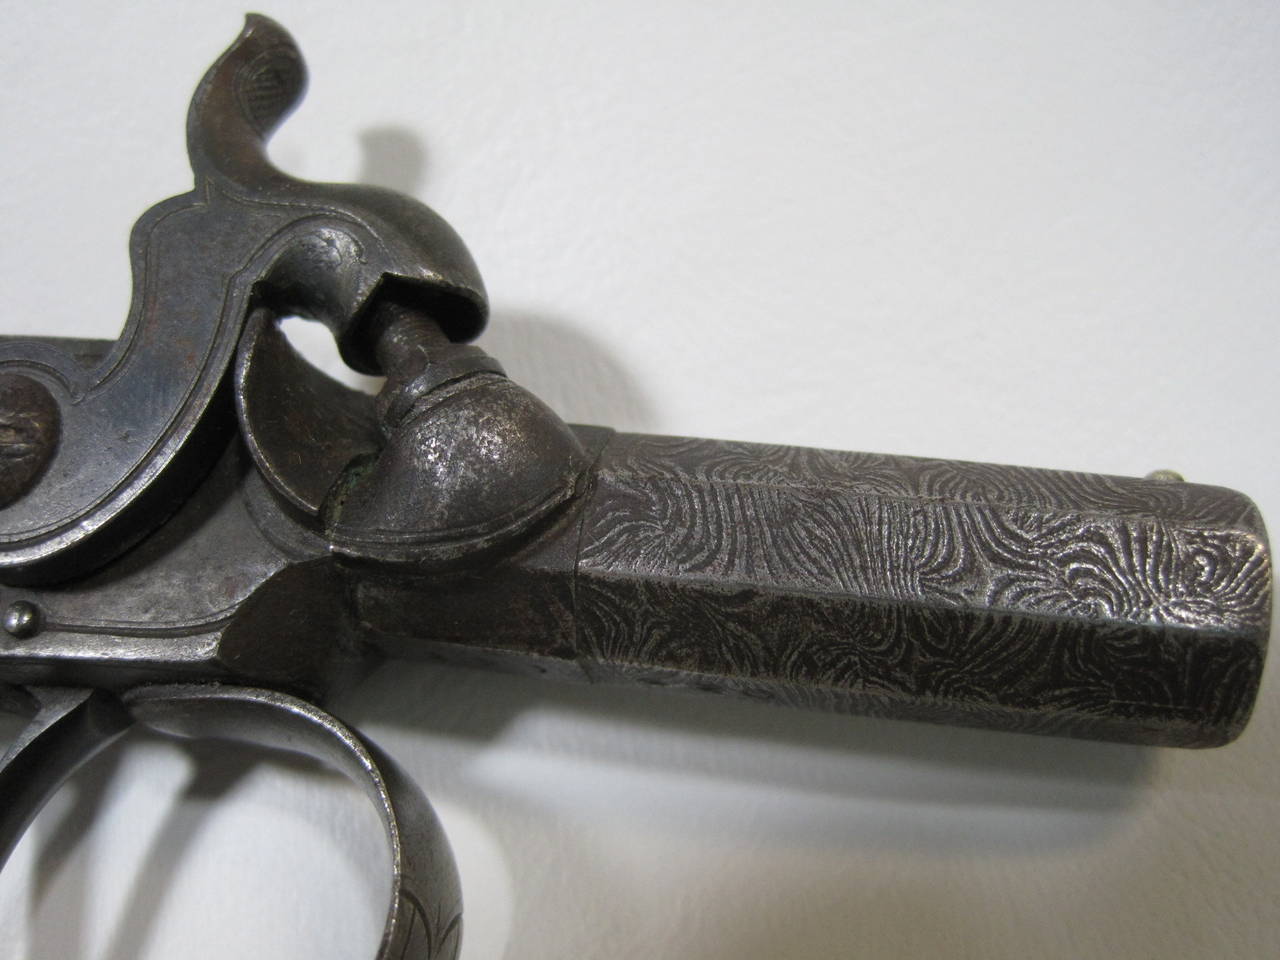 Unusual & rare Percussion Pocket Pistol by M & I Pattison, Circa 1840.

Free shipping within the United States and Canada.